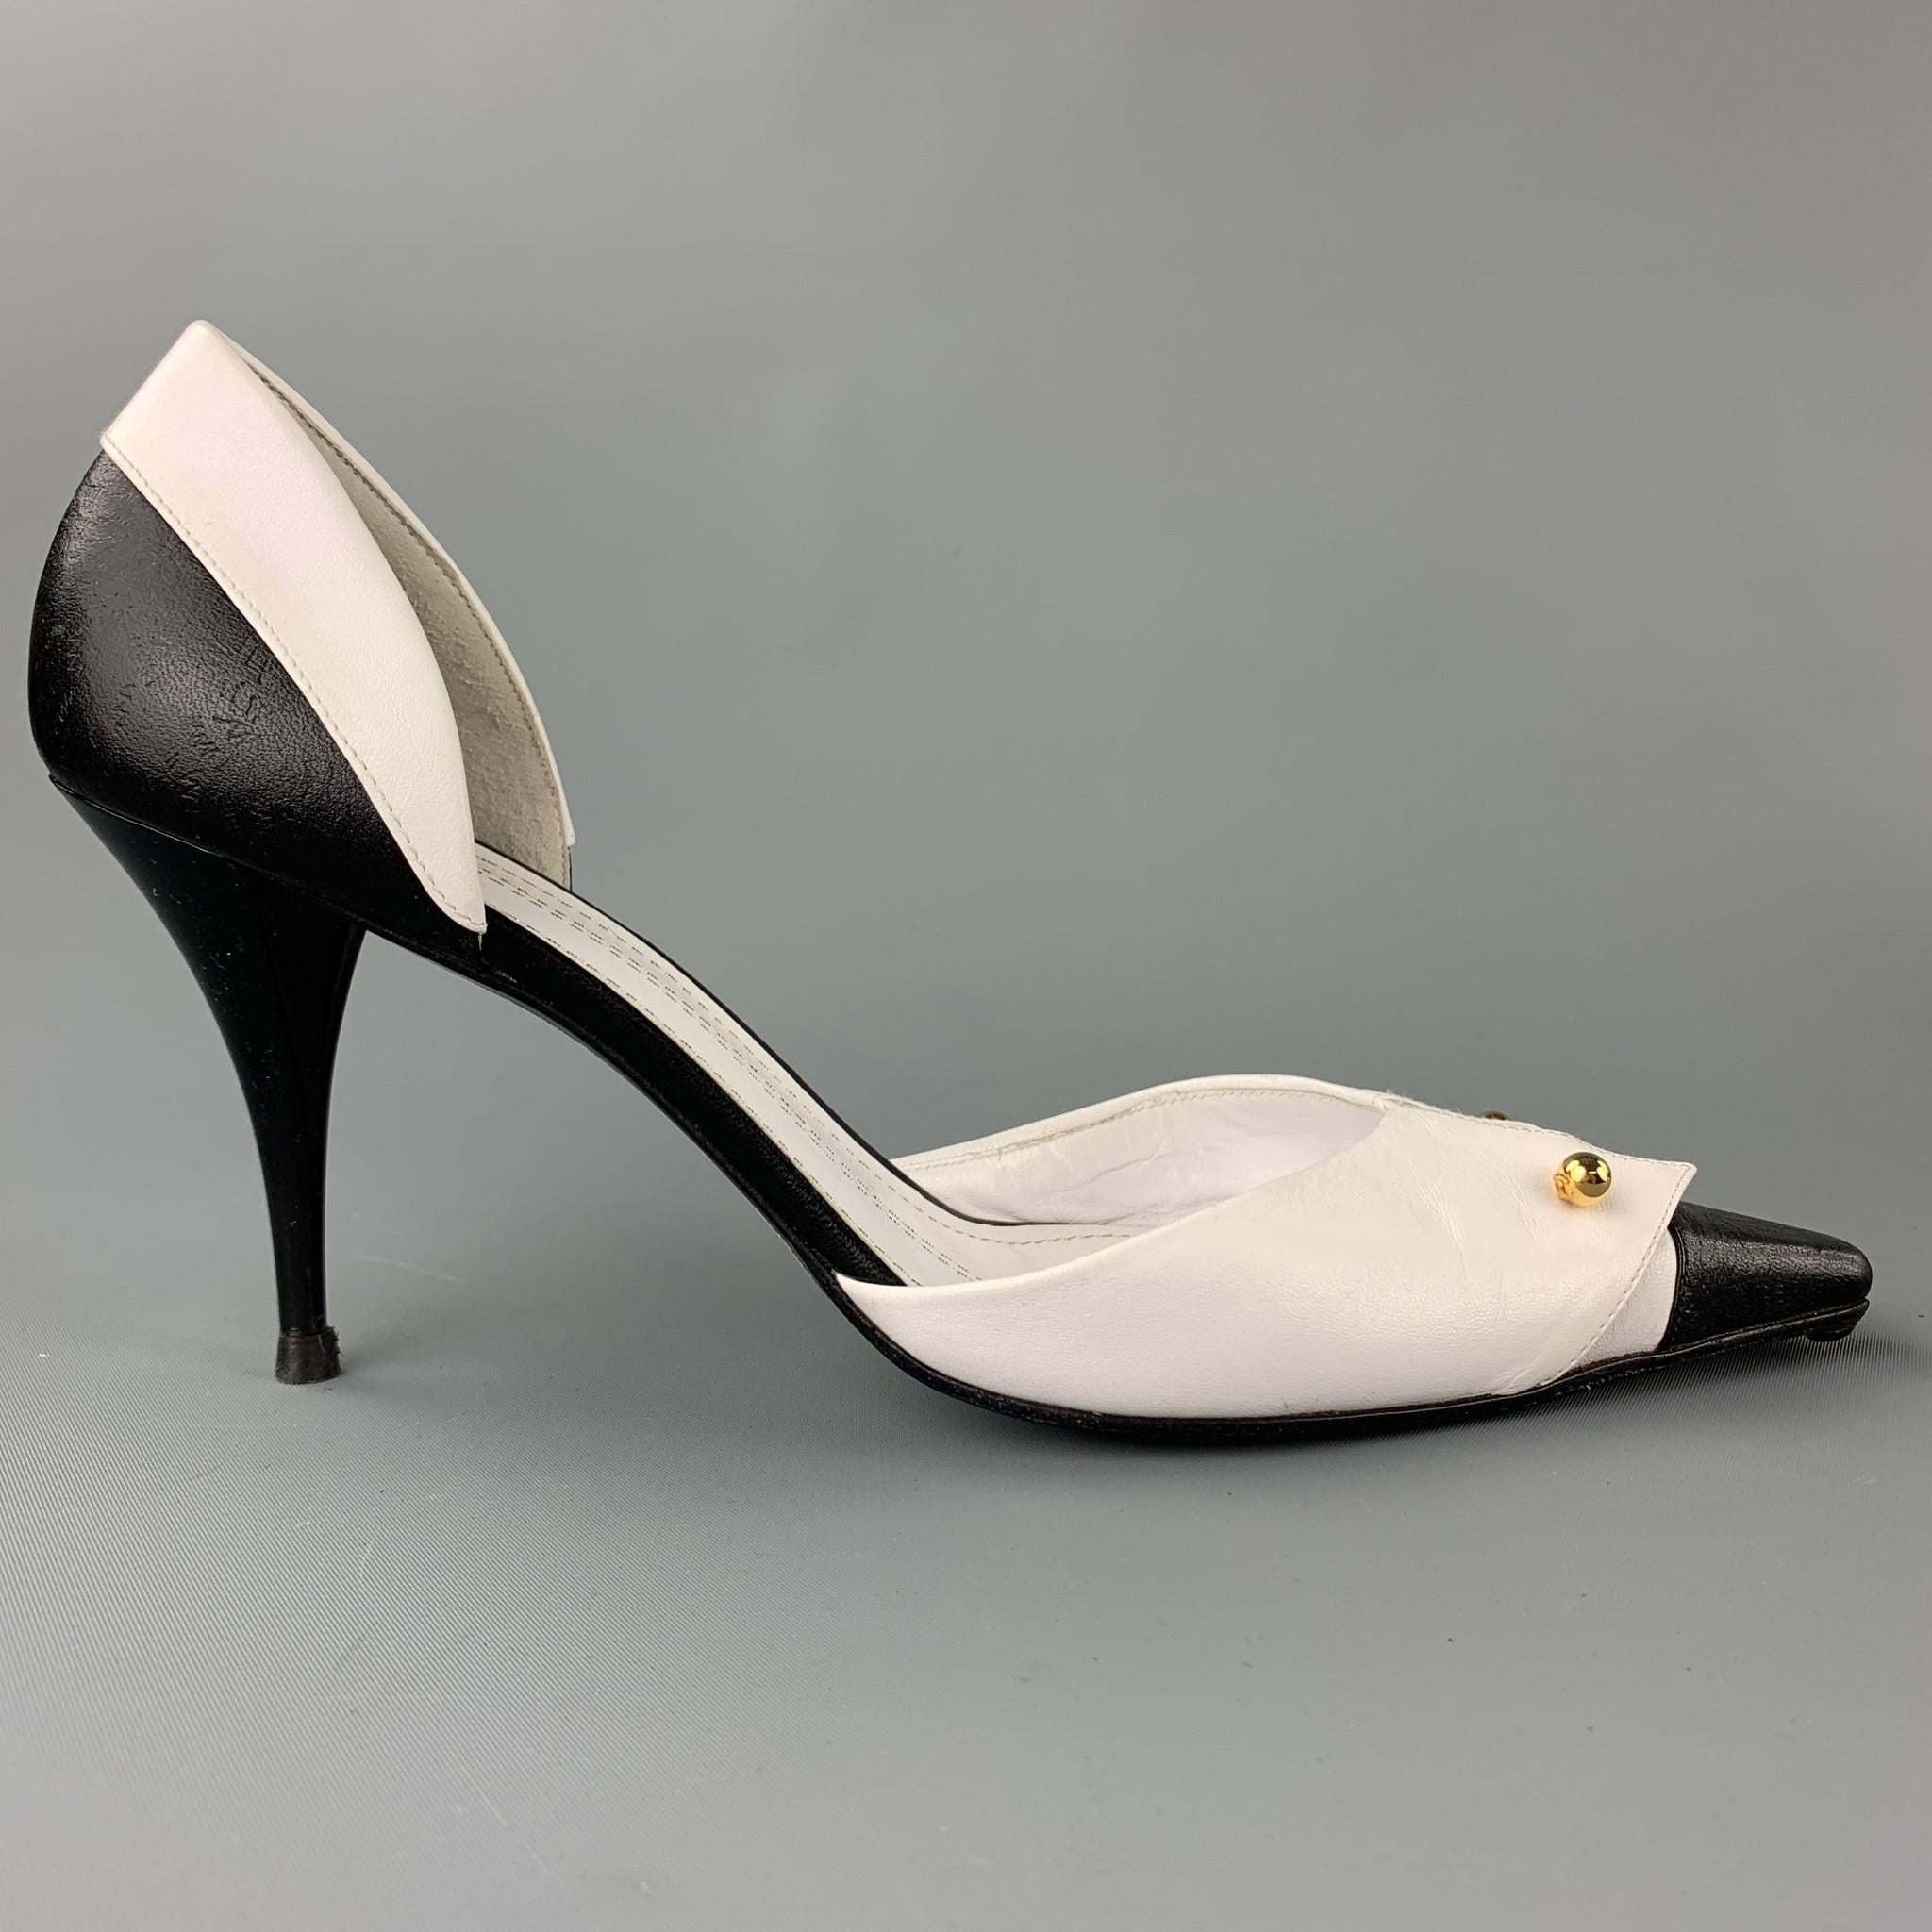 CHANEL pumps comes in a white & black two toned leather featuring a D'Orsay style, folded flap, gold tone logo bar detail, and a stiletto heel. Made in Italy.

Very Good Pre-Owned Condition.
Marked: EU 40

Measurements:

Heel: 3.5 in.